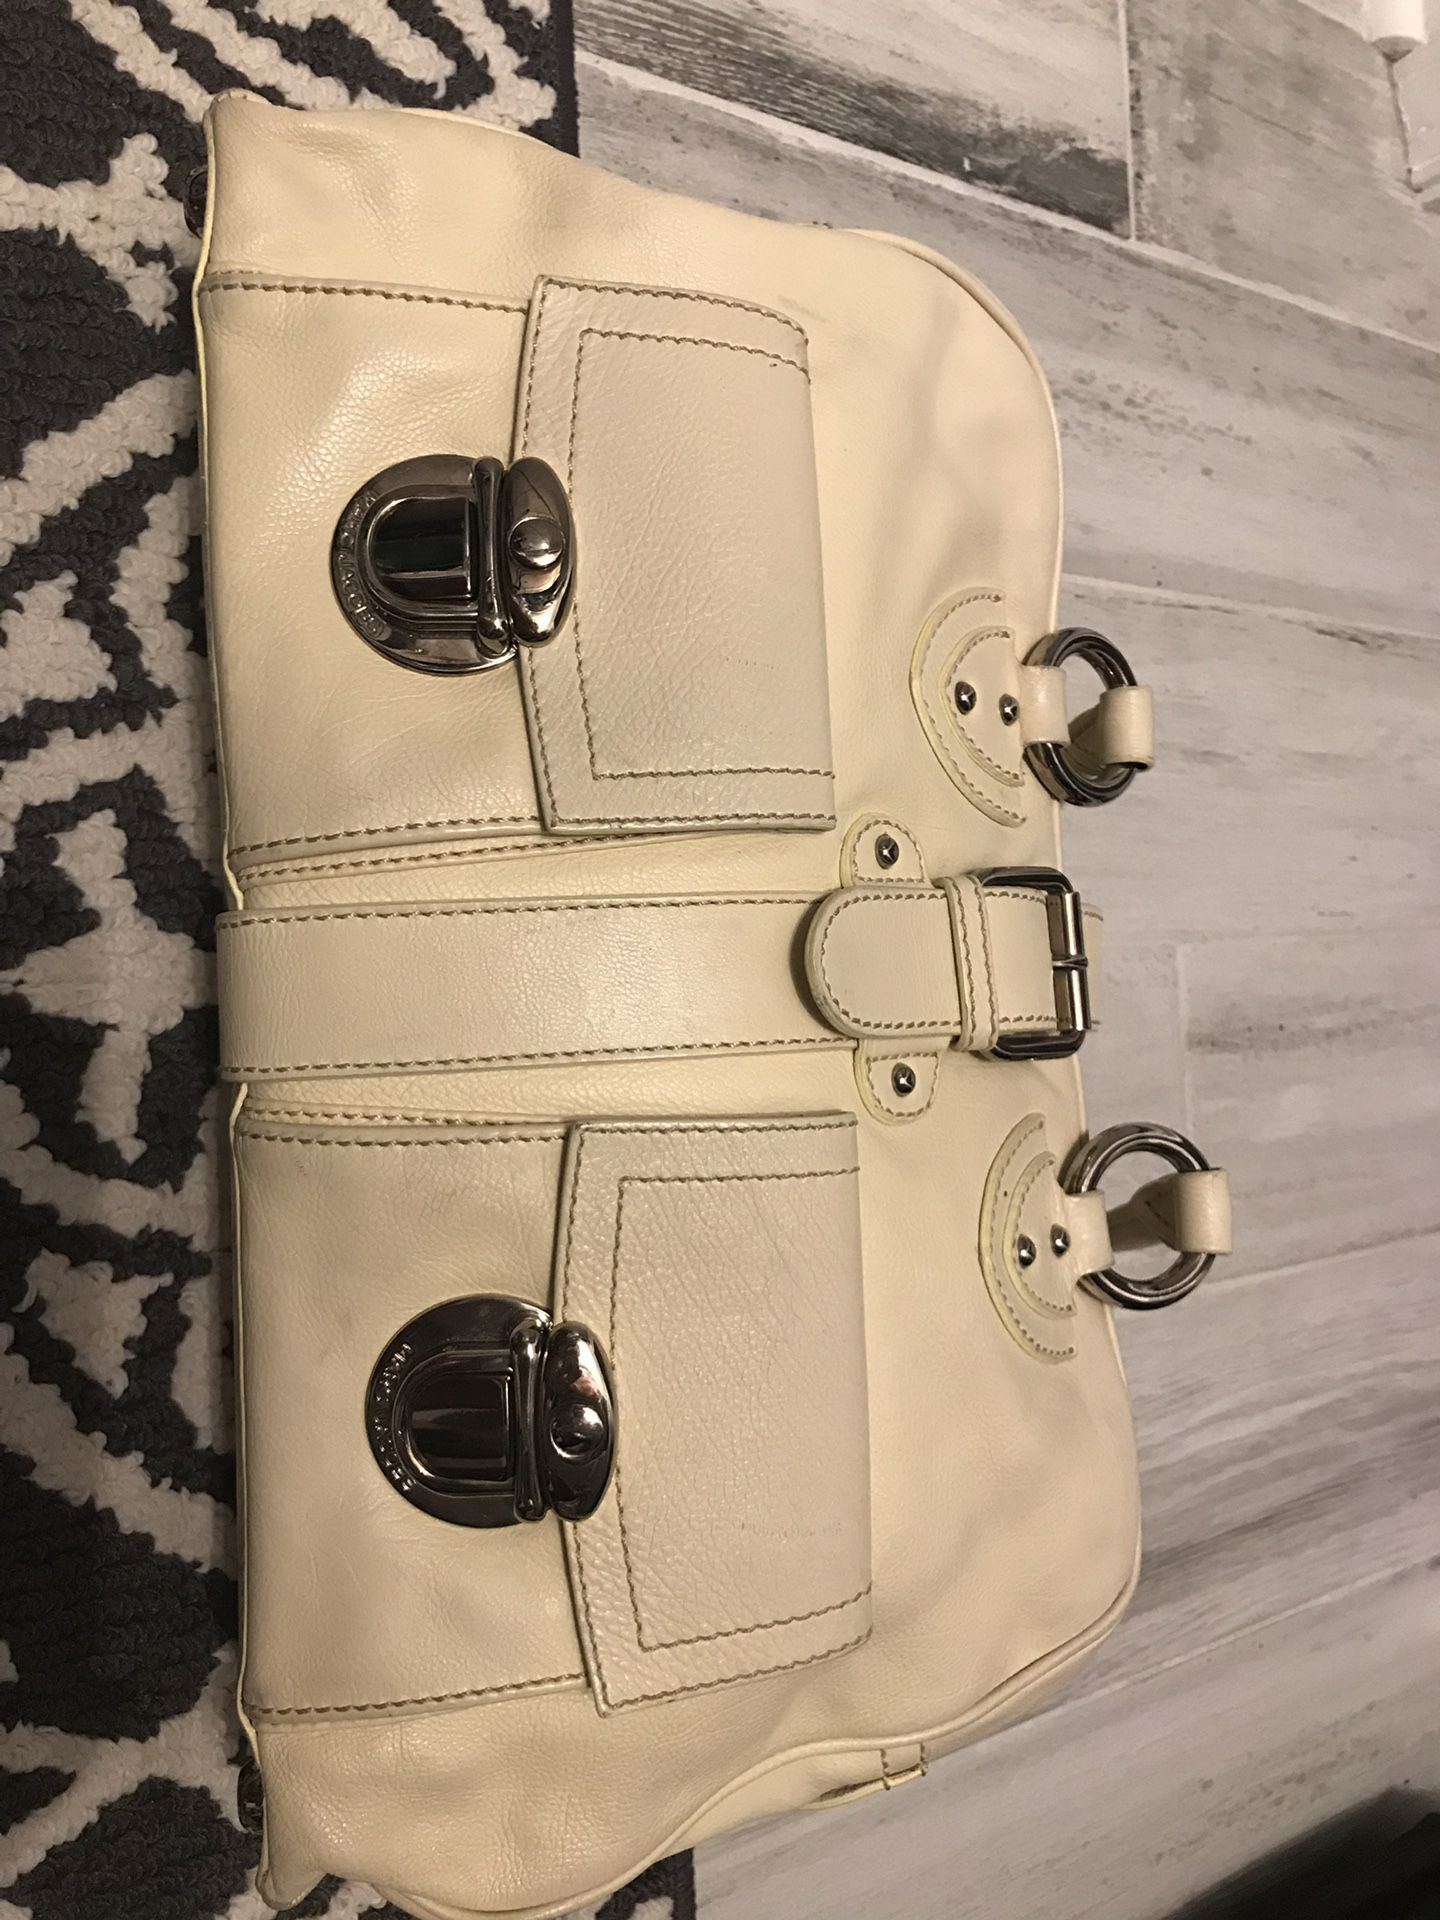 Marc Jacobs leather hand bag